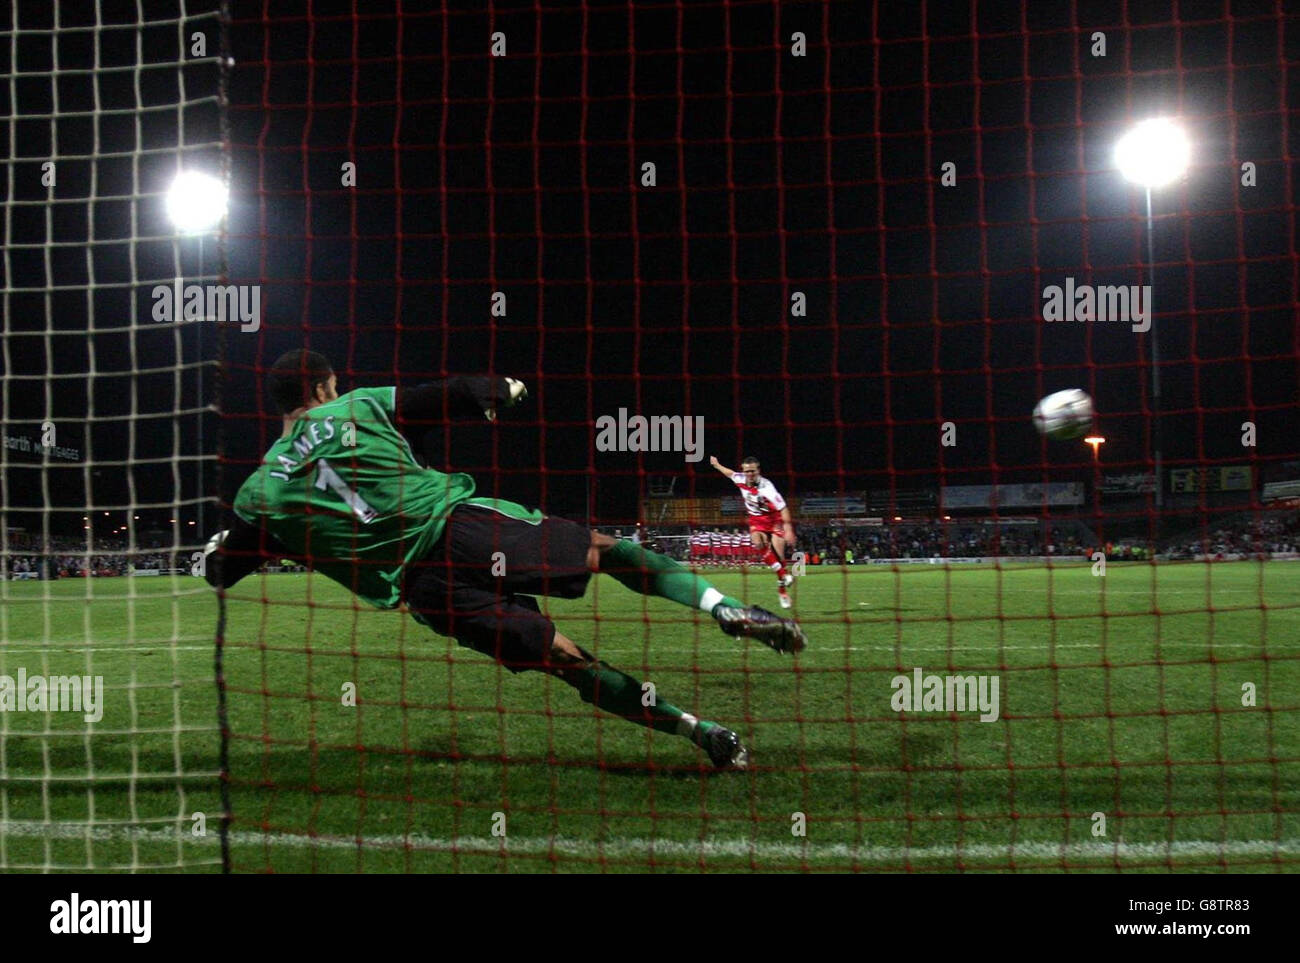 Manchester City's goal keeper David James (L) lets in a goal from Doncaster Rovers' James Coppinger during the penalty shoot-out in the Carling Cup second round match at The Earth Stadium, Doncaster. Stock Photo